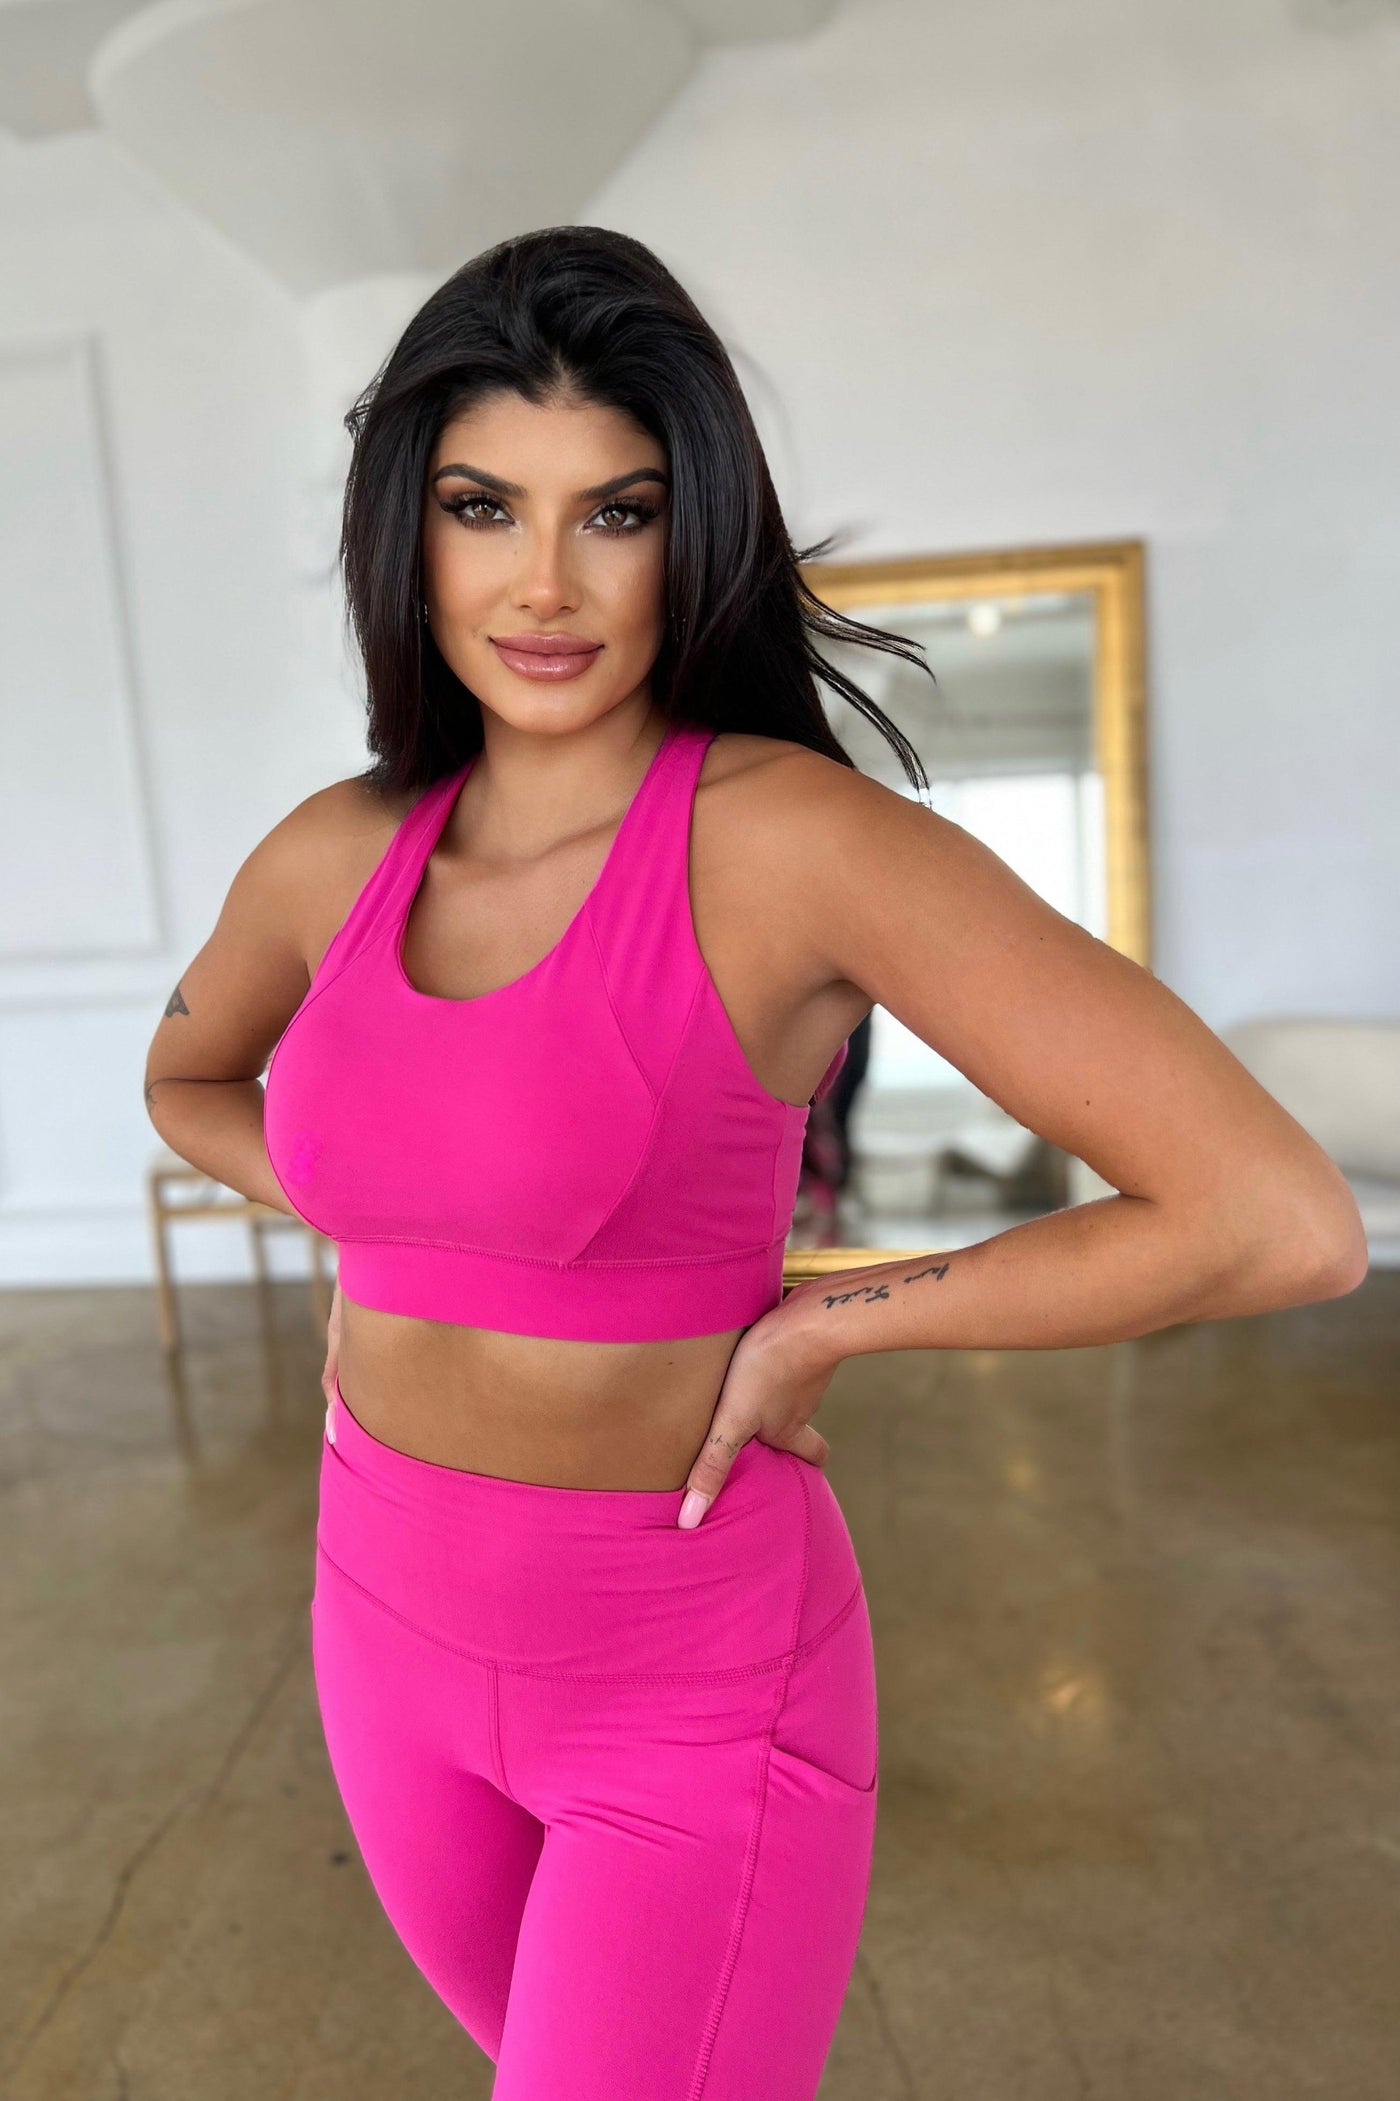 SONIC PINK SPORTS BRA (PLUS SIZE AVAILABLE) , LEGGINGS , it’sNOMB. The Label , ACTIVEWEAR, ATHLEISURE, it's nomb the label, ITS NOMB, Its None of My Business, ITSNOMB, ITSNOMBTHELABEL, IT’S NOMB, JESSICA NICKSON, LOUNGE WEAR, LOUNGEWEAR, Maternity Friendly, PINK ATHLEISURE, pink sports bra, SPORTS TANK, SPORTSBRA, SPORTTANK, WORK OUT, WORKOUT, YOGA , It's NOMB , itsnomb.com